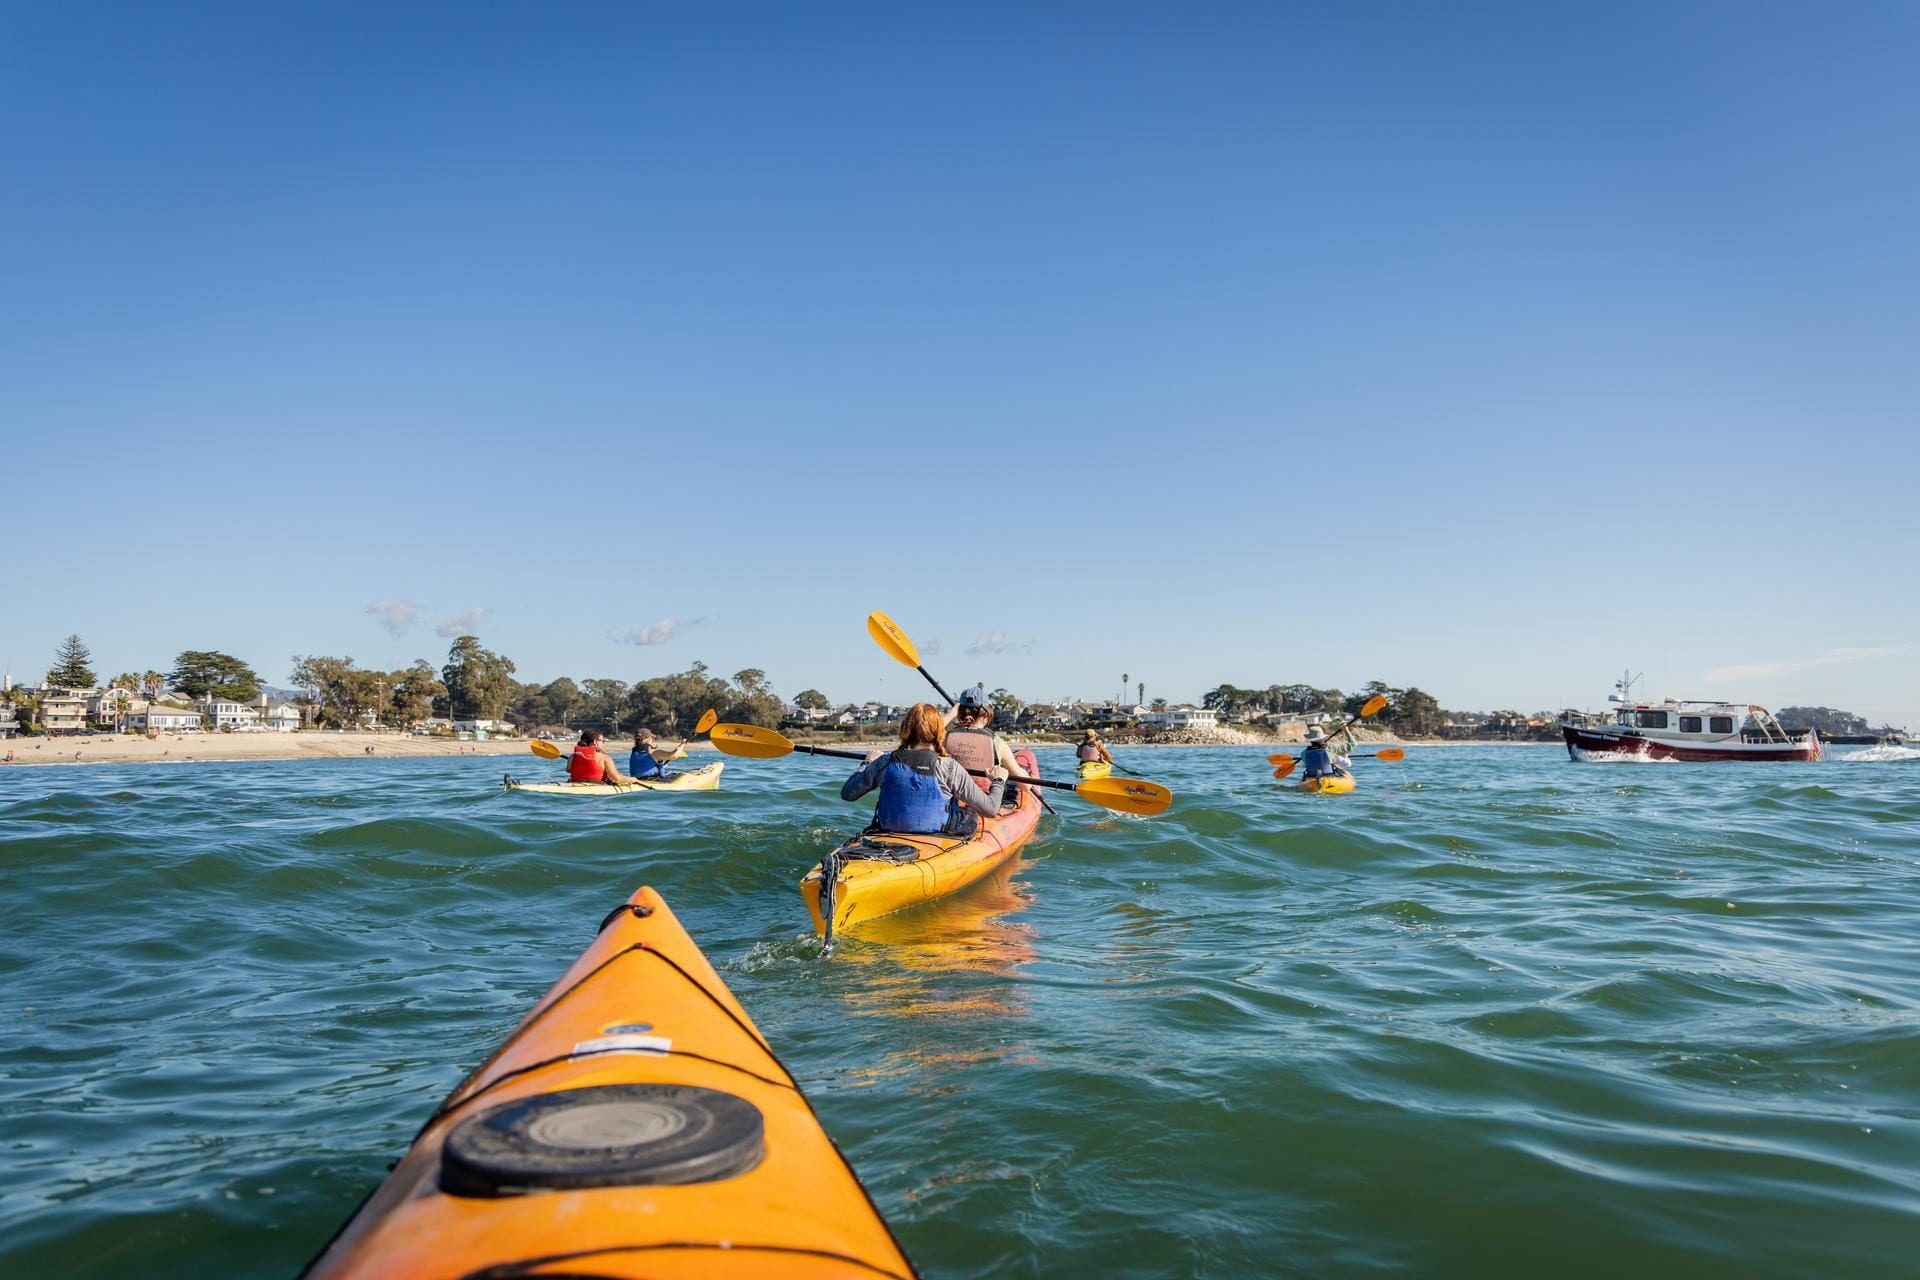 A view from a kayak to other kayakers near UCSC.